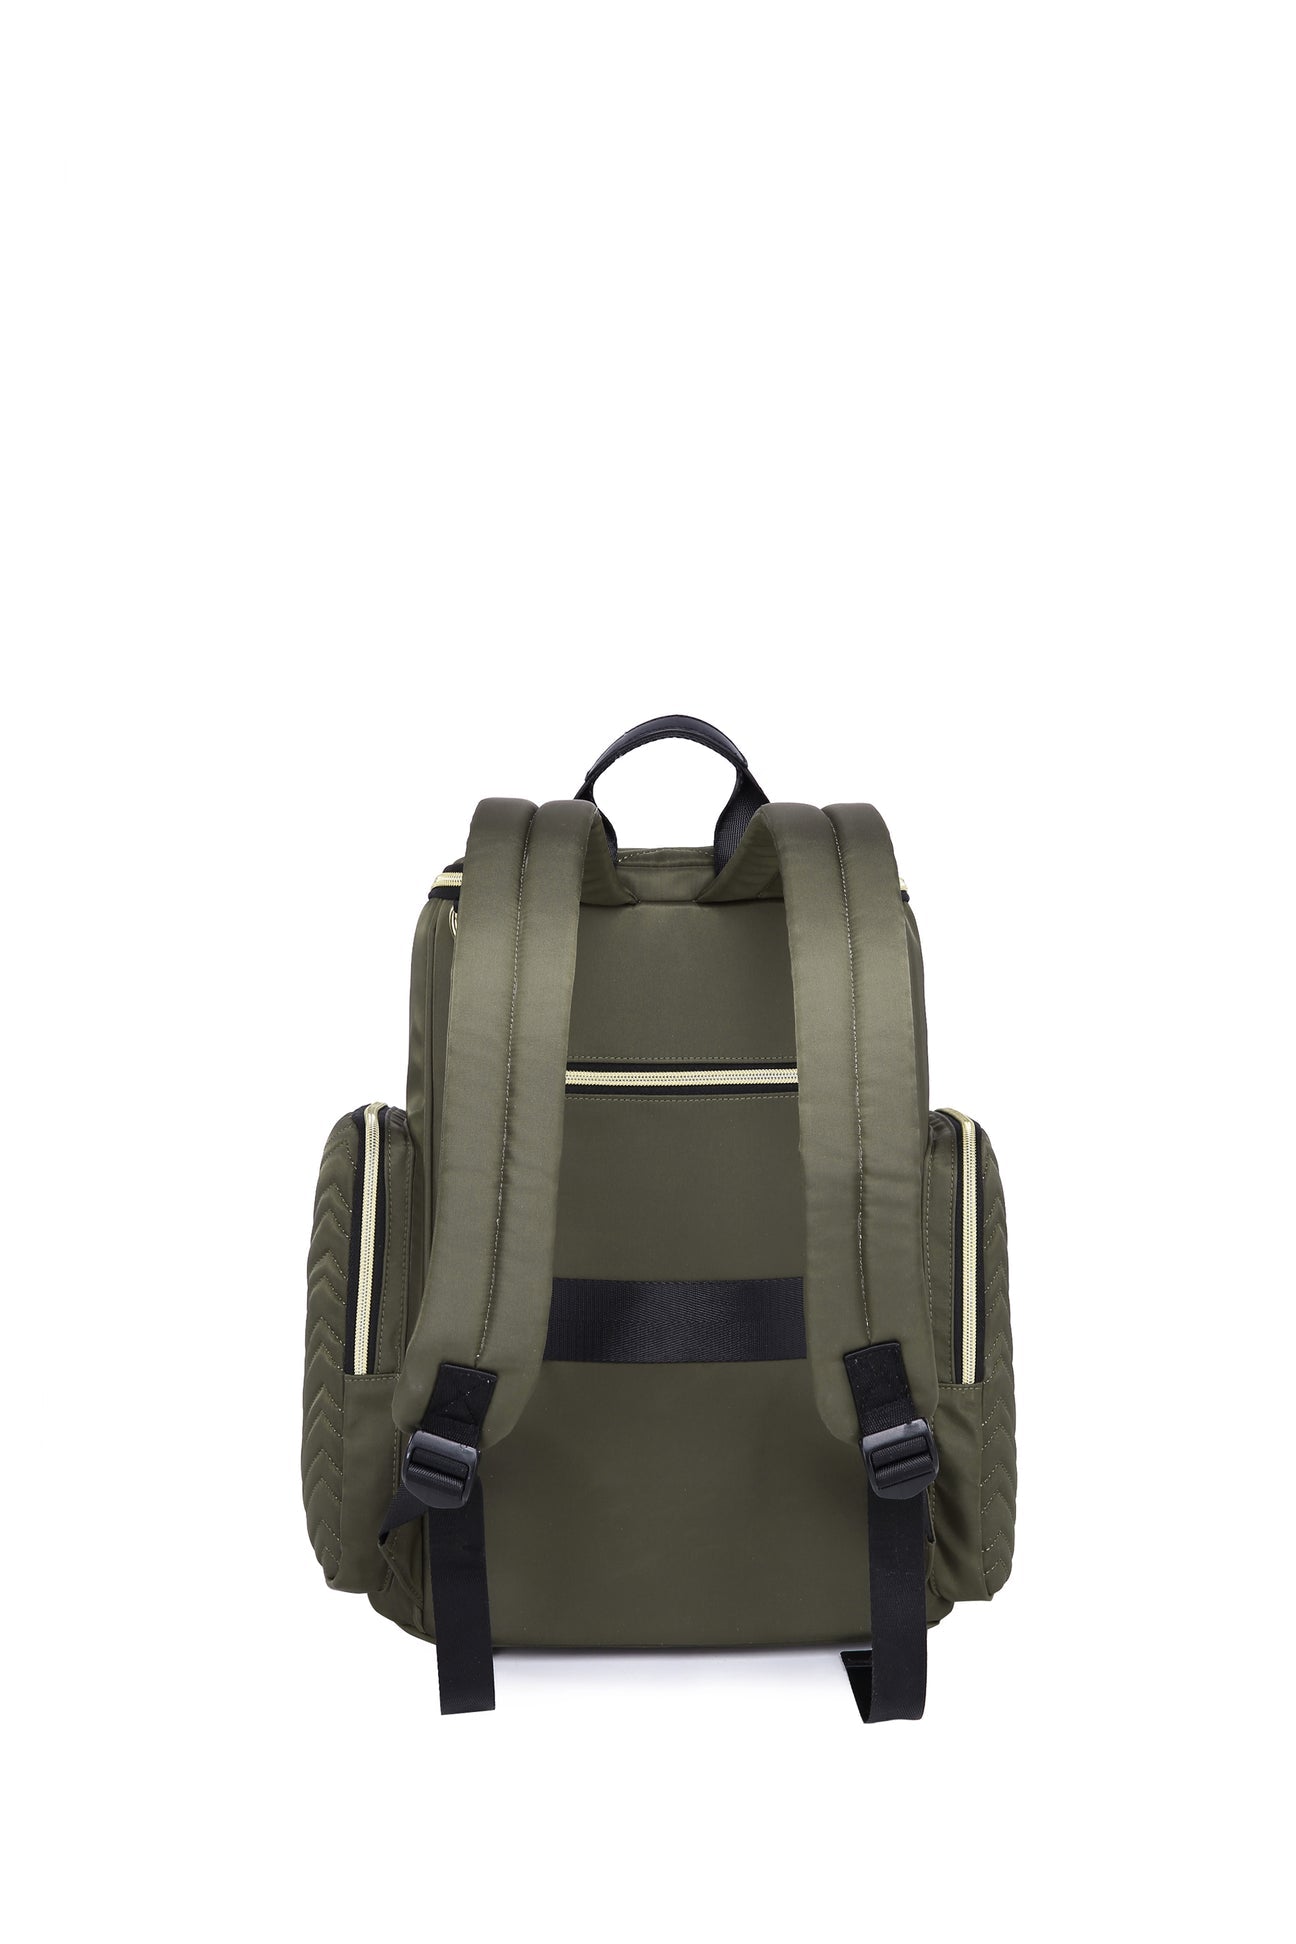 Backpack Nappy Bag Green CLEARANCE